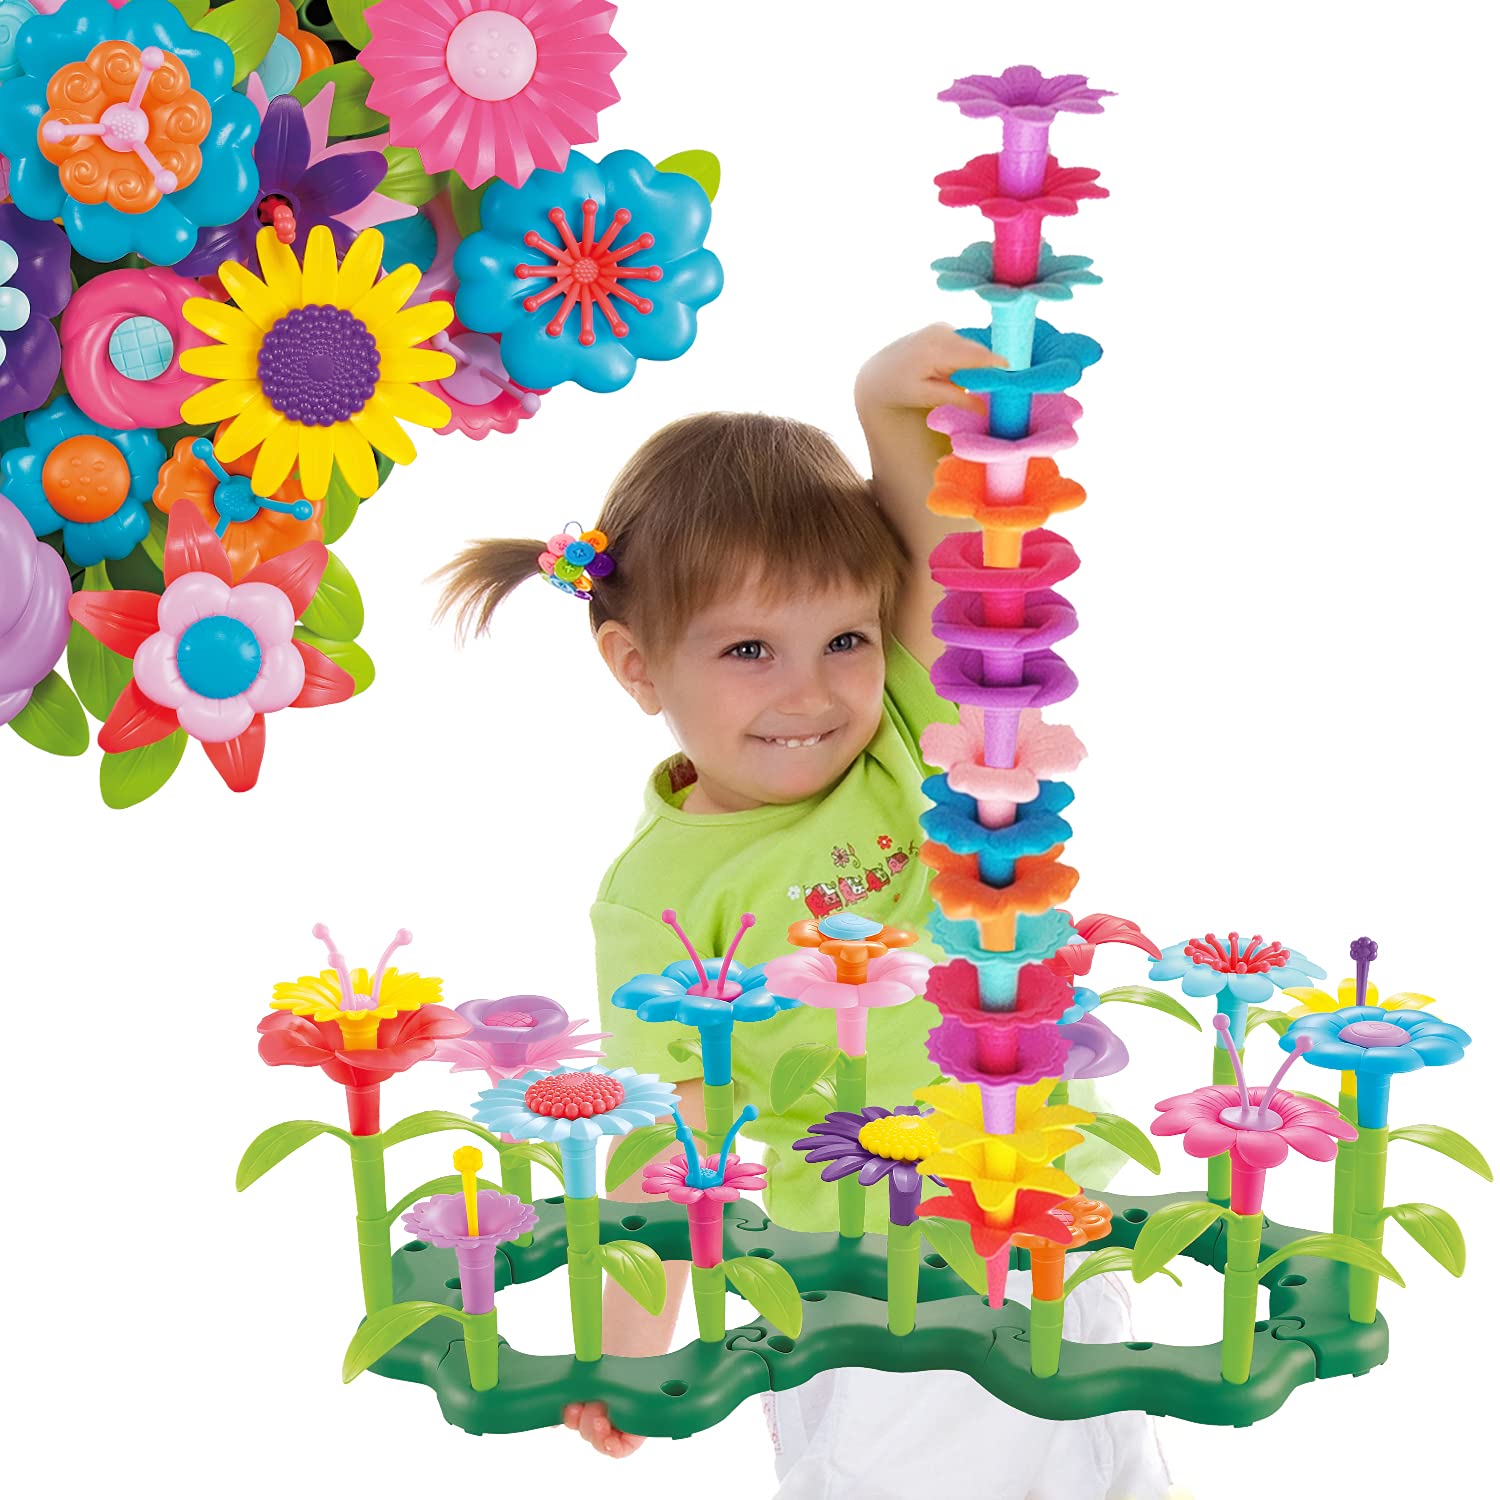 oyVelt Flower Garden Building Set - 148 pcs STEM Toy with Container - Best Gift for Girls 3-7 Years  - Like New